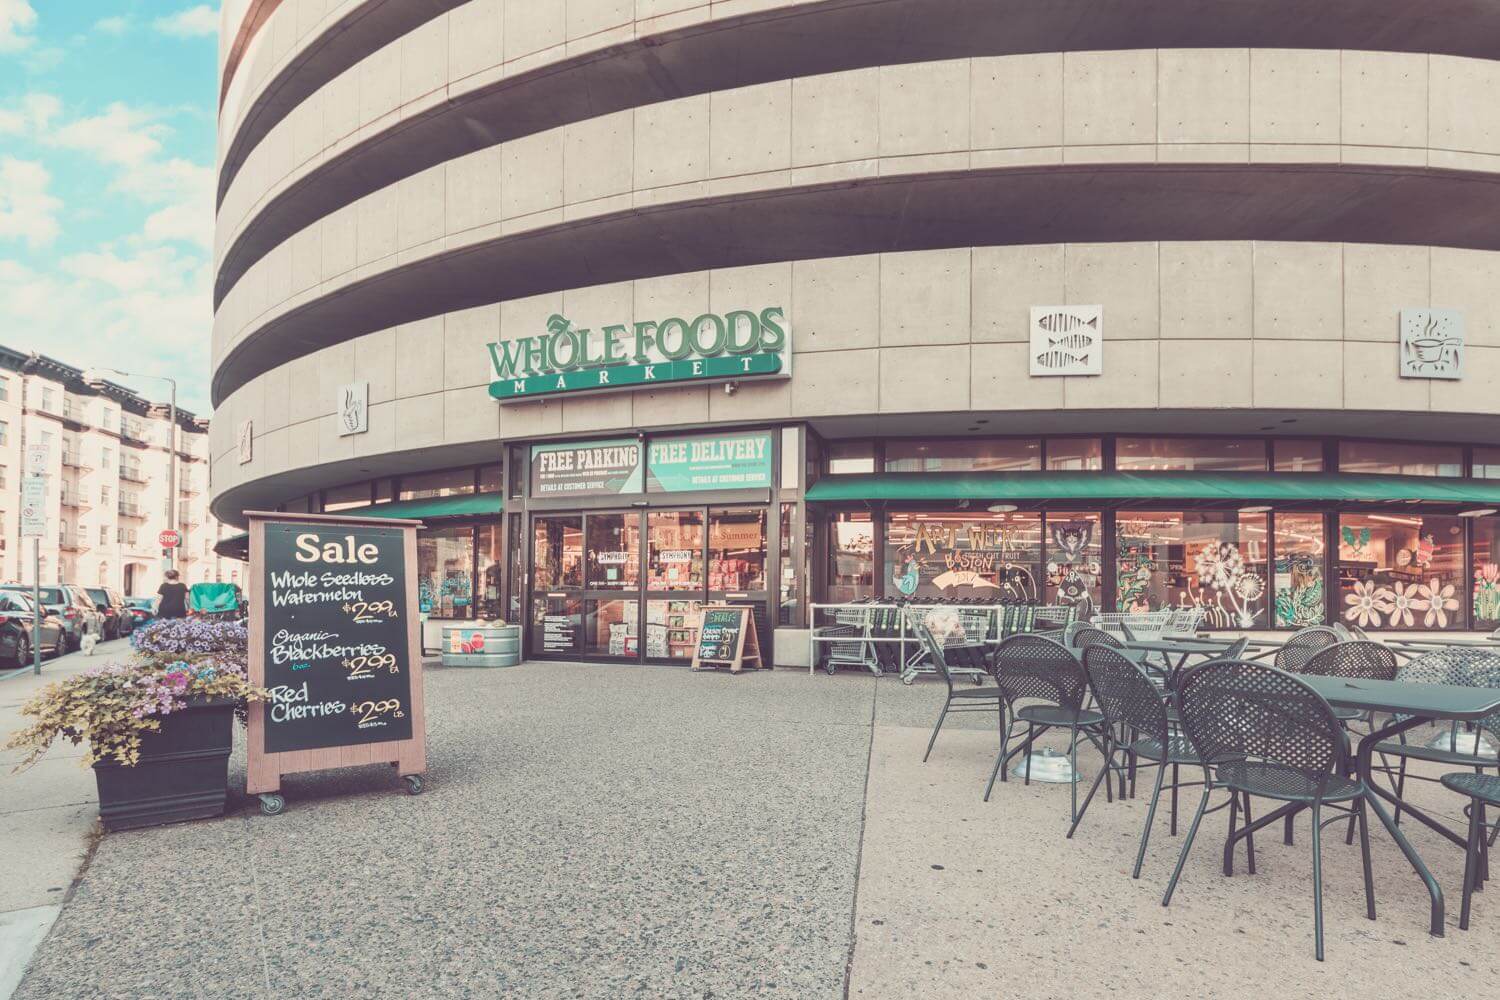  Whole Foods, Your Neighborhood Grocer- Only 7 Minutes Away slide image